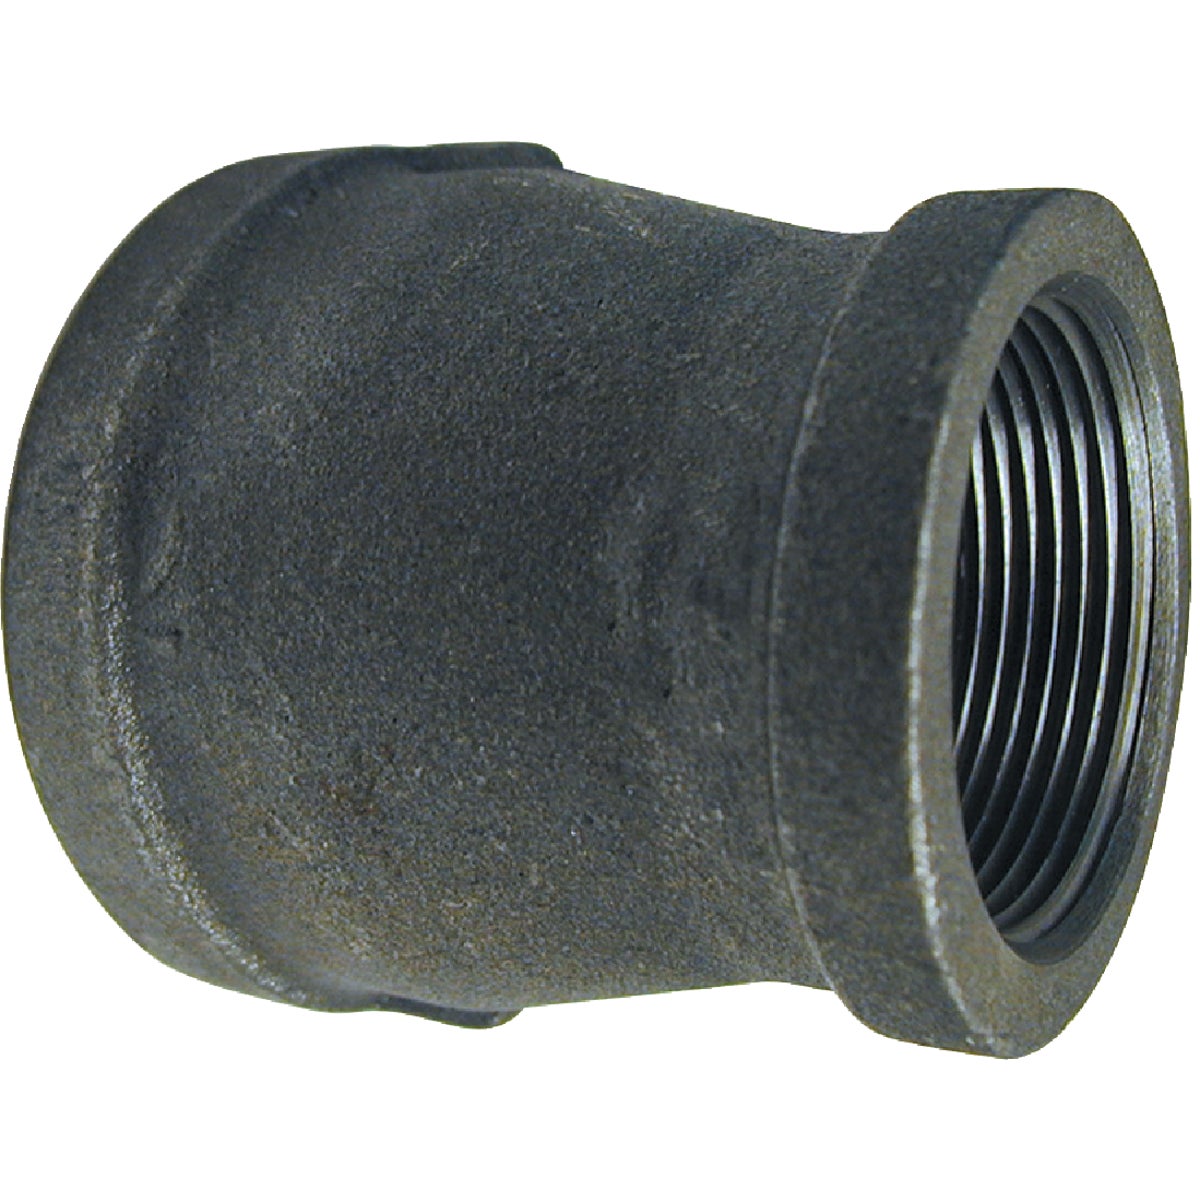 Southland 2 In. x 1-1/4 In. Malleable Black Iron Reducing Coupling